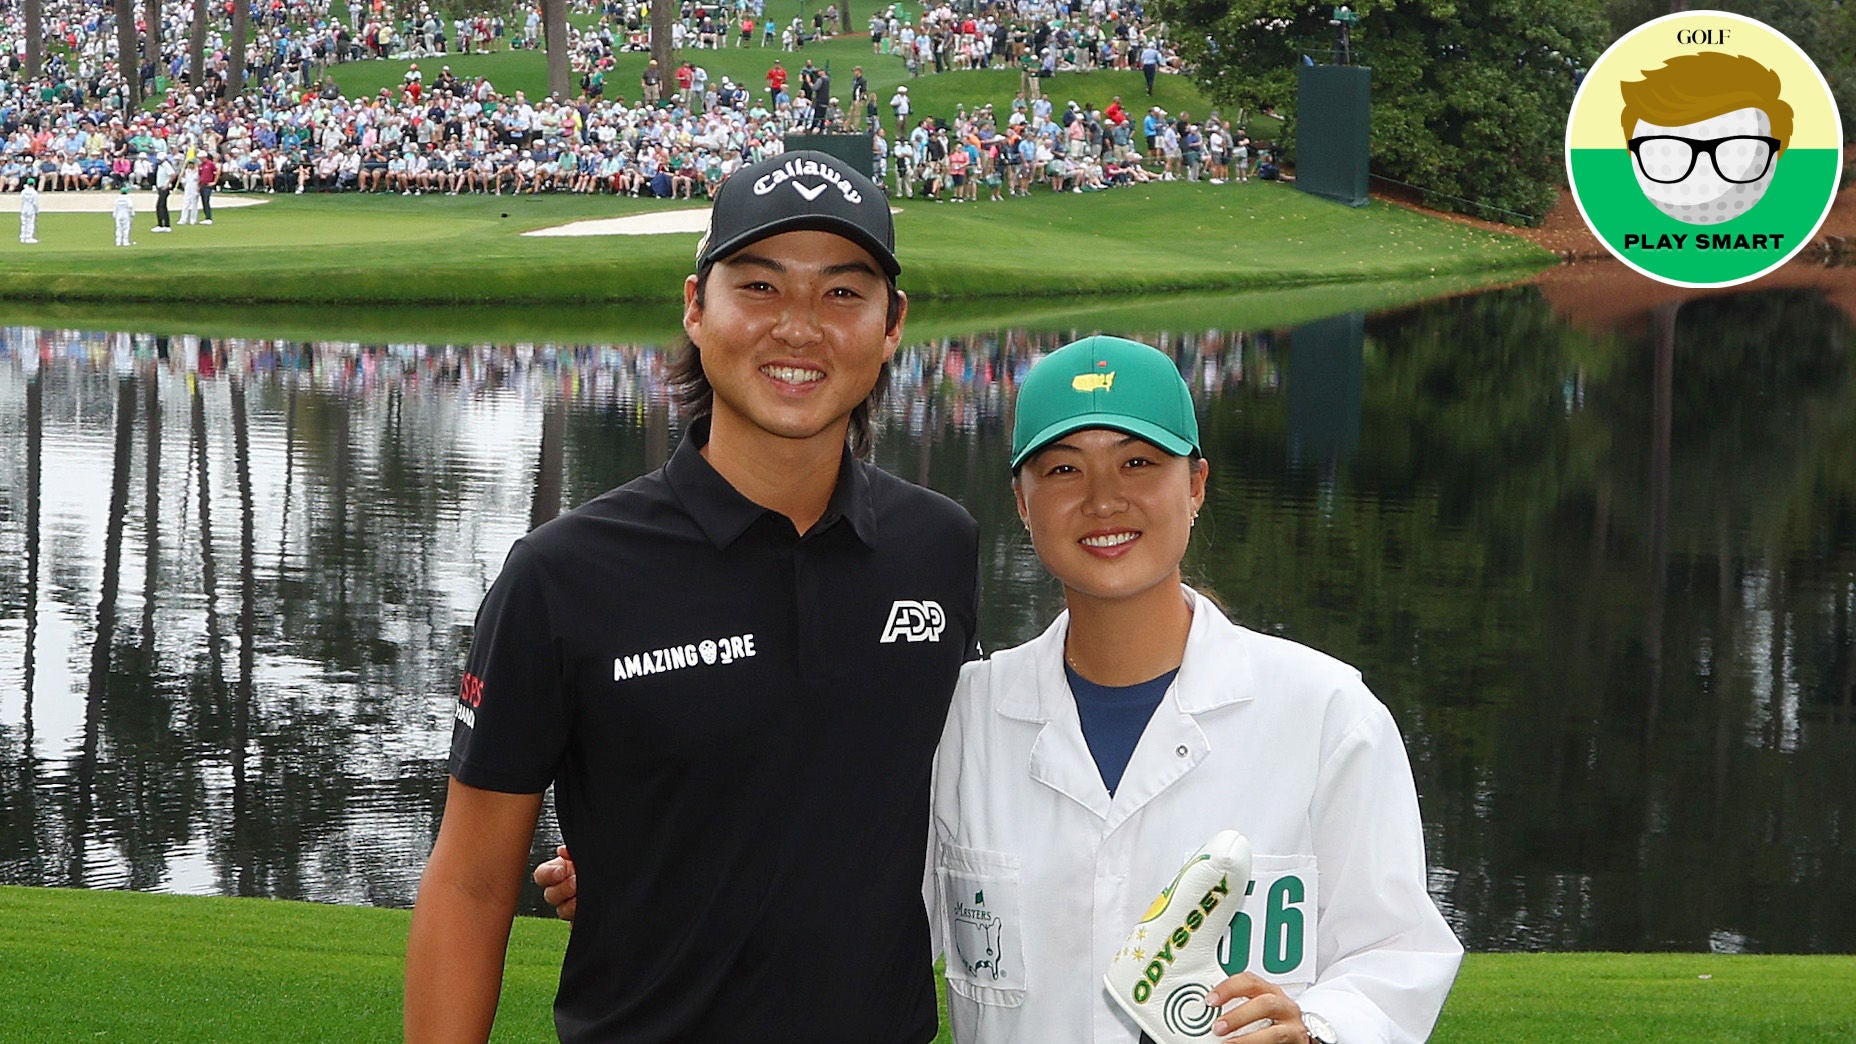 What Min Woo Lee has learned from his twotime major championship